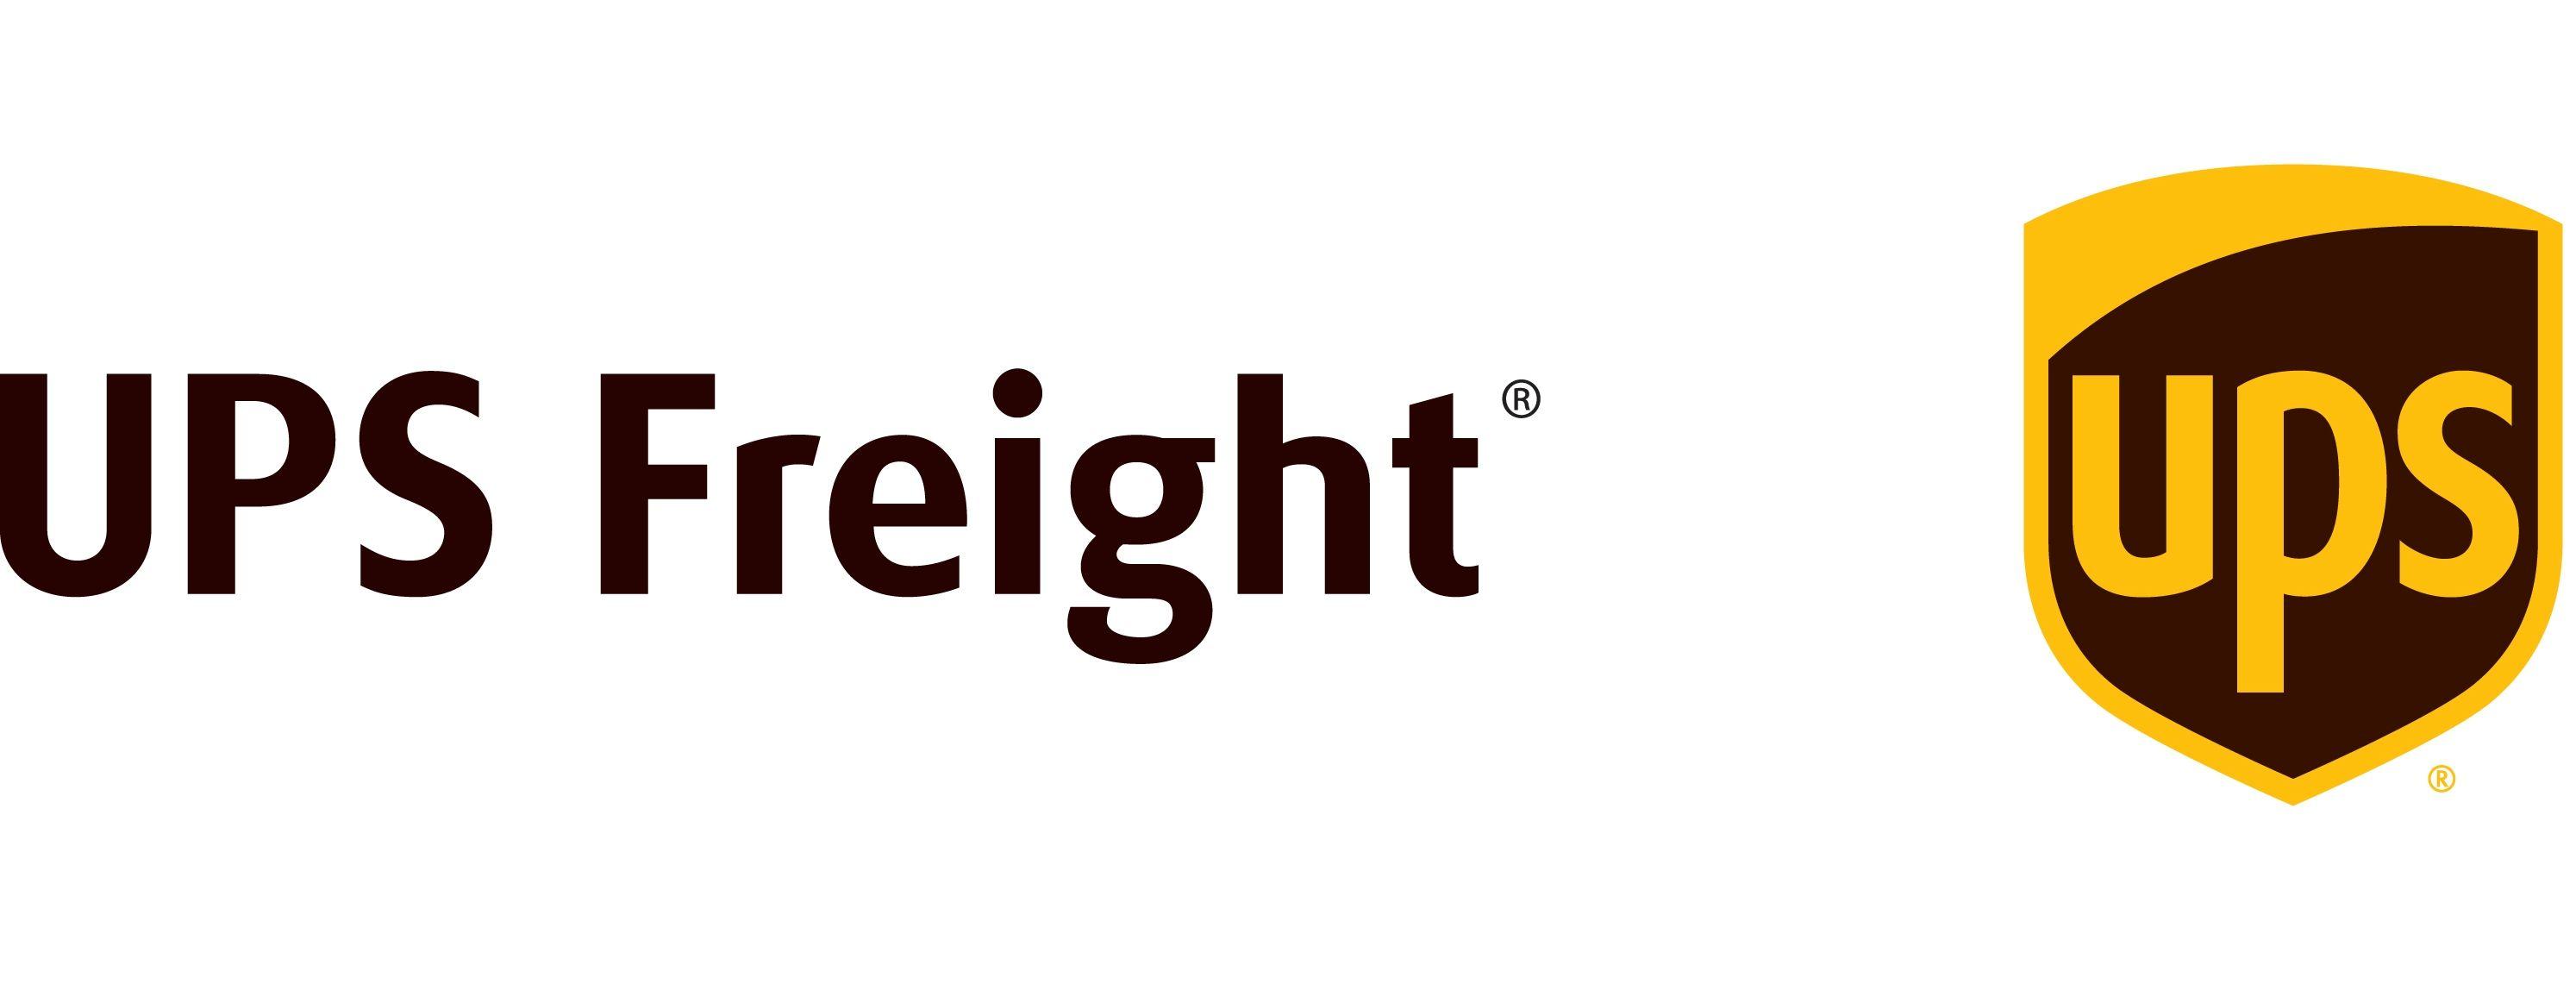 UPS Freight Logo - UPS Freight Customer Service Number [Toll-Free] 800-333-7400 - Help